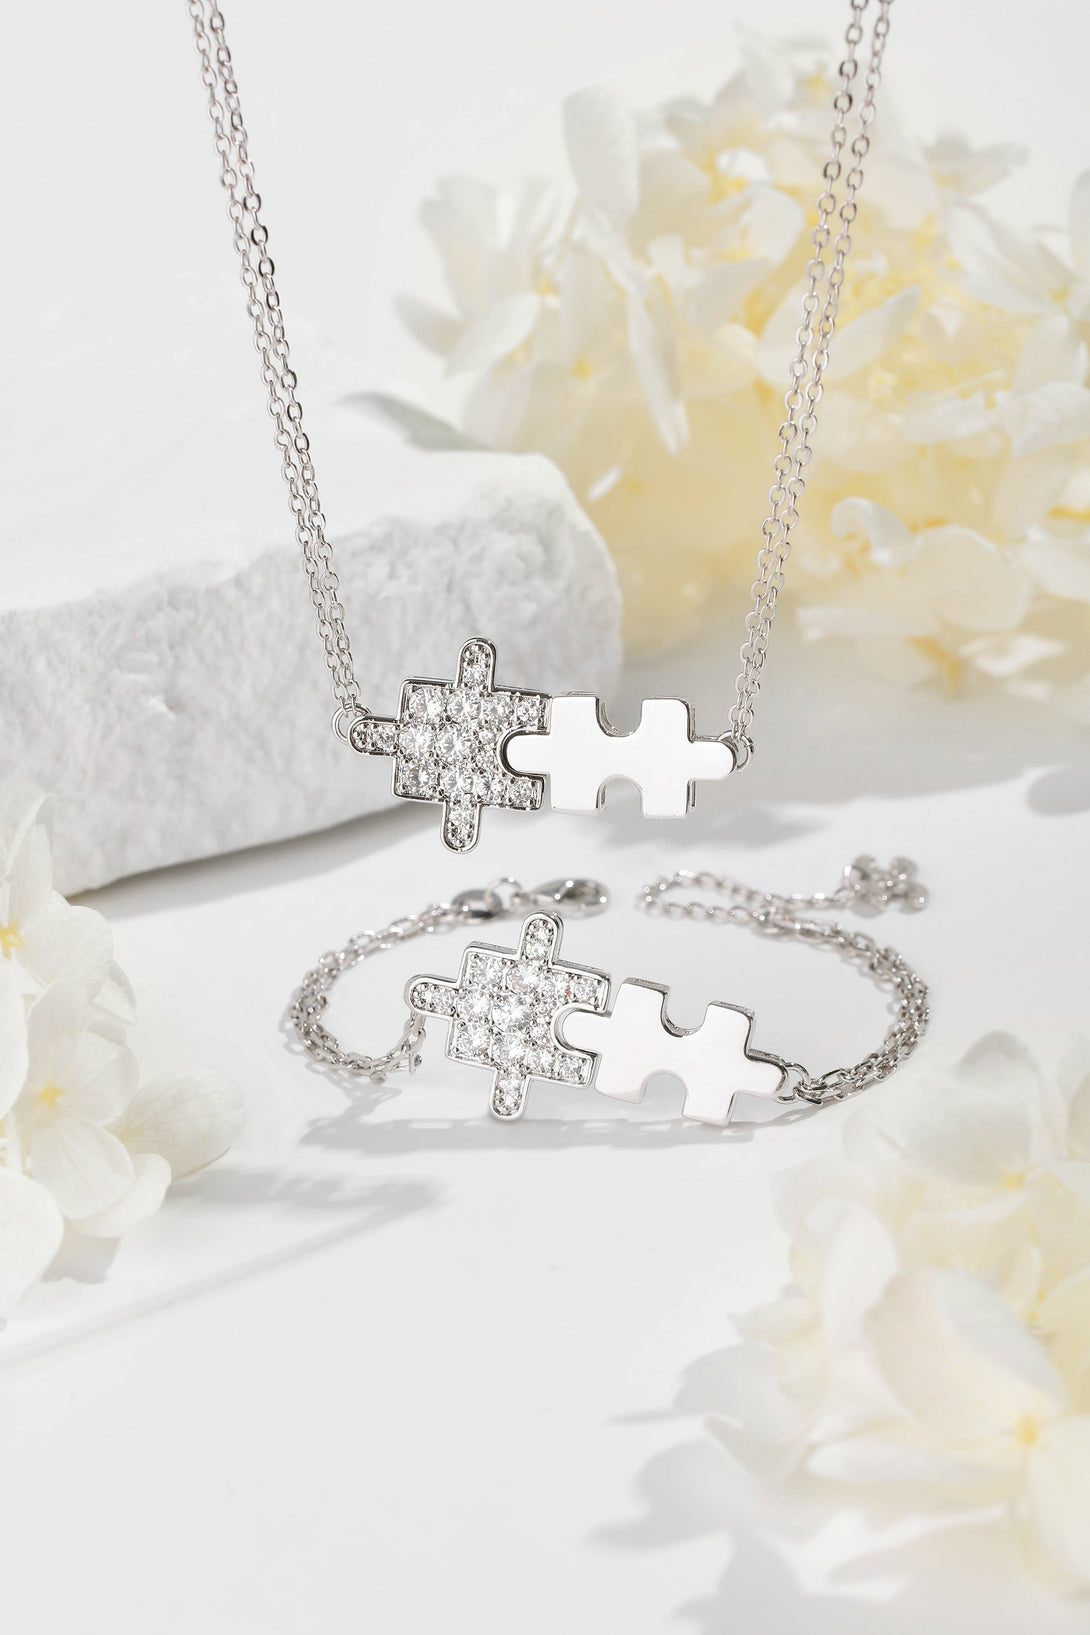 Silver Jigsaw Puzzle Necklace - Classicharms